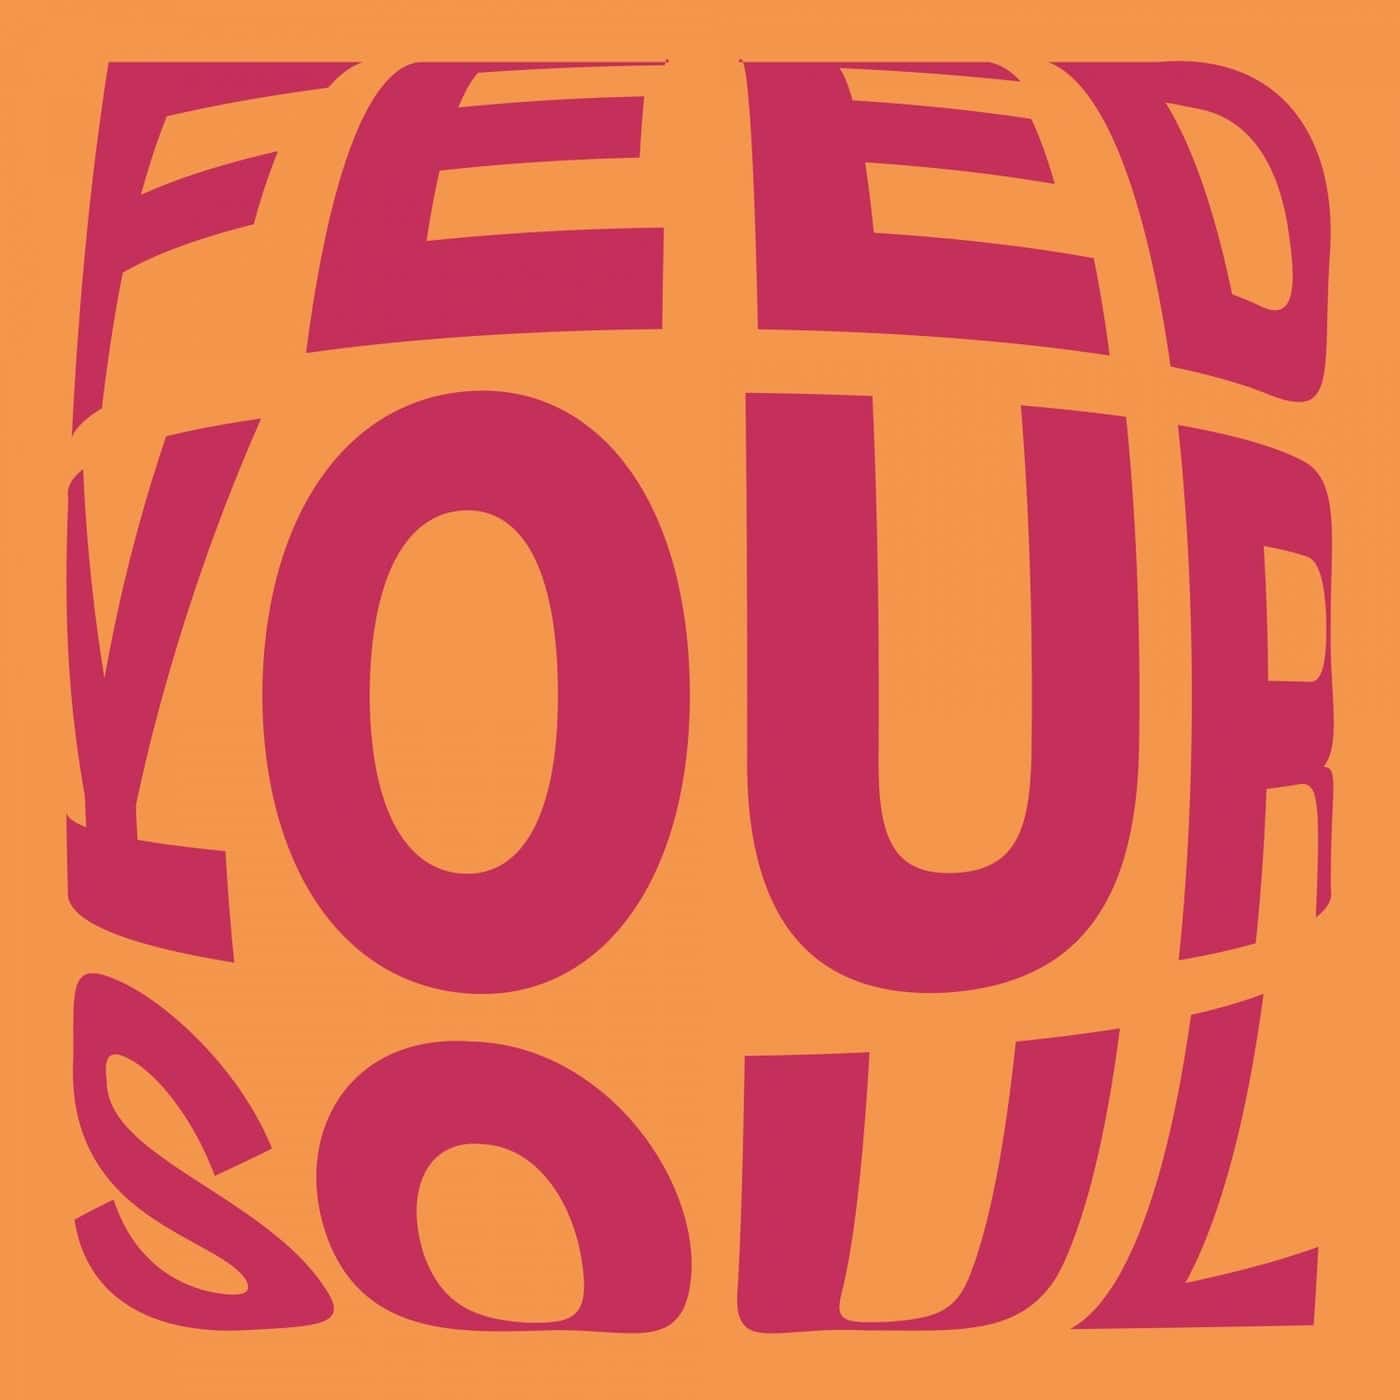 Download Kevin McKay, Jen Payne - Feed Your Soul on Electrobuzz